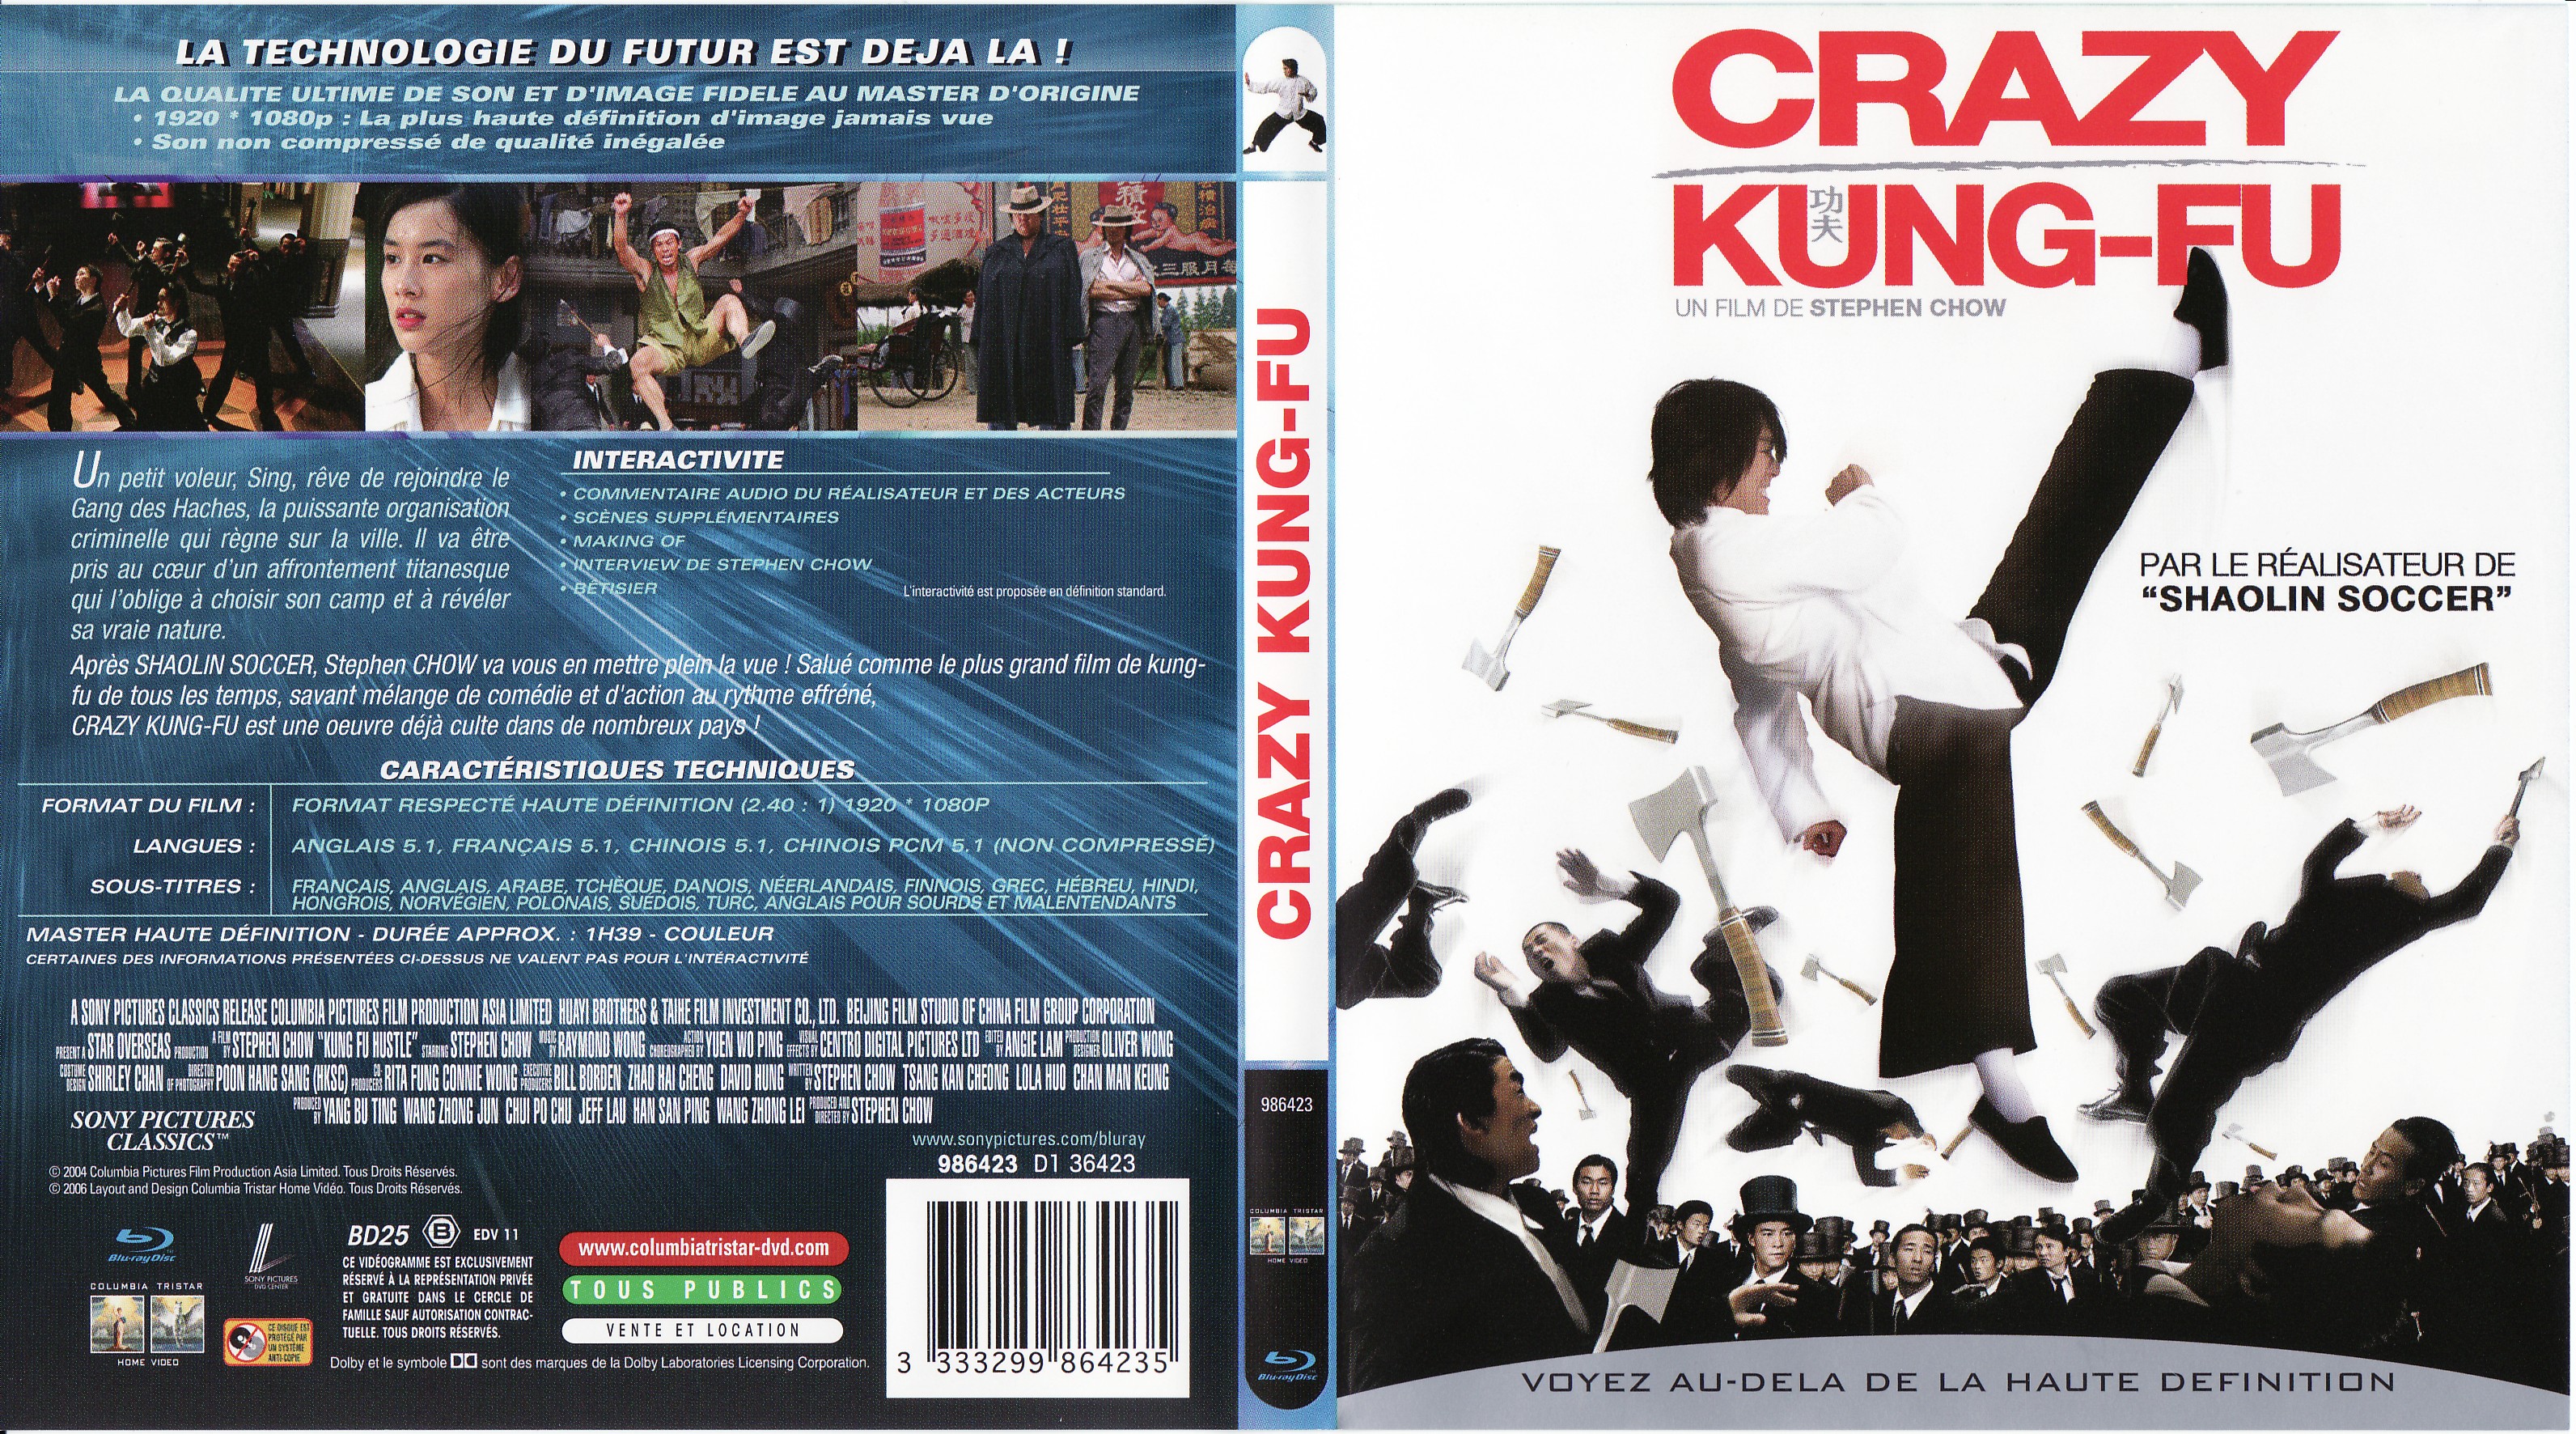 Jaquette DVD Crazy kung-fu (BLU-RAY)